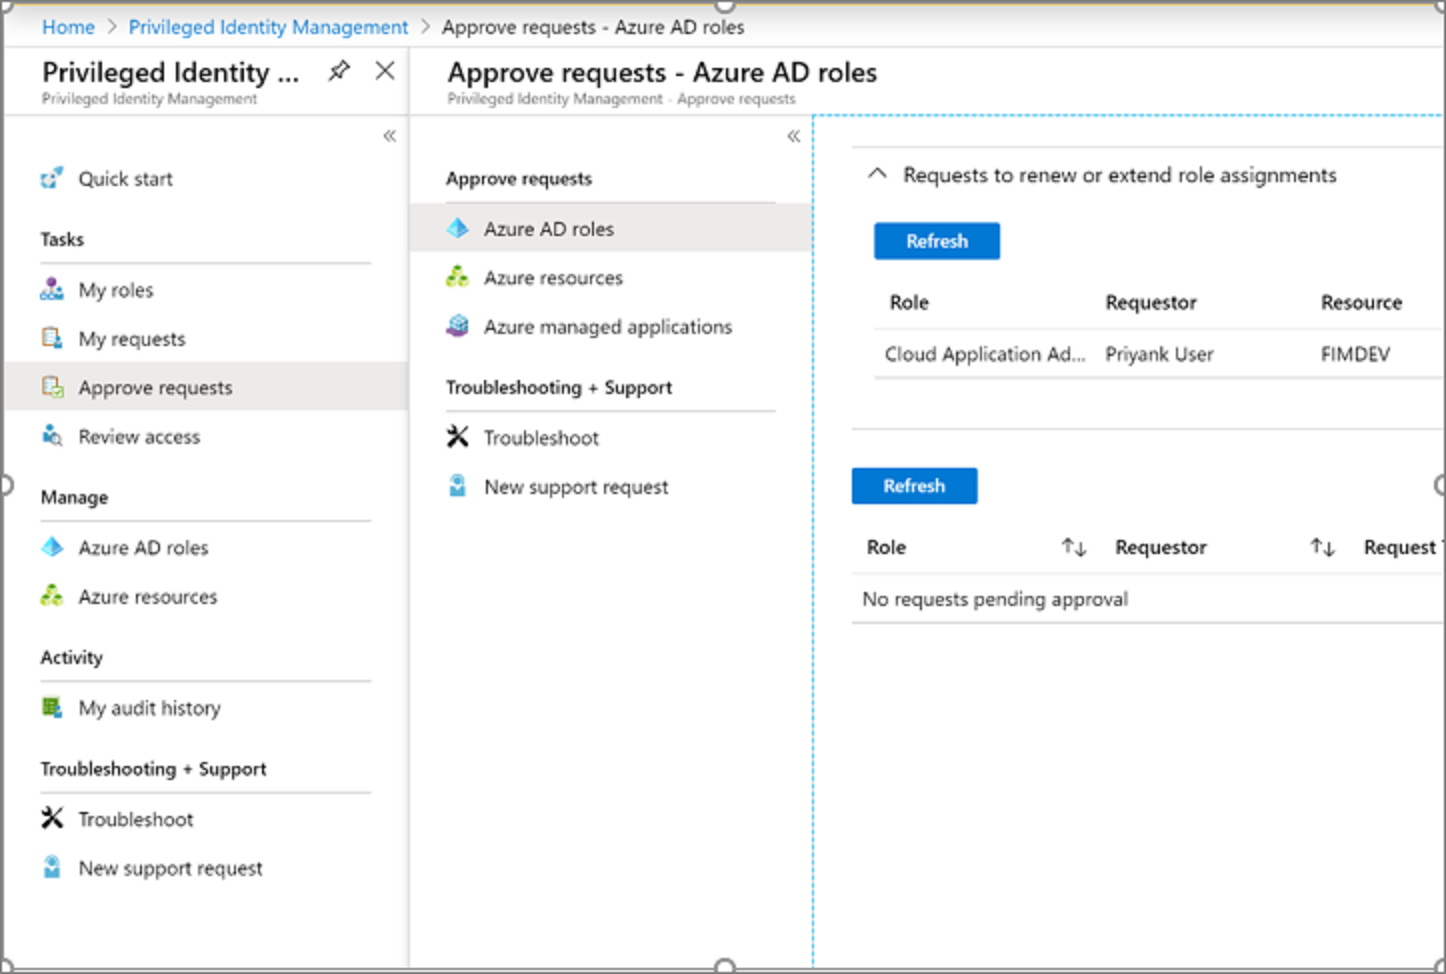 Approve requests - page showing request to review Azure AD roles